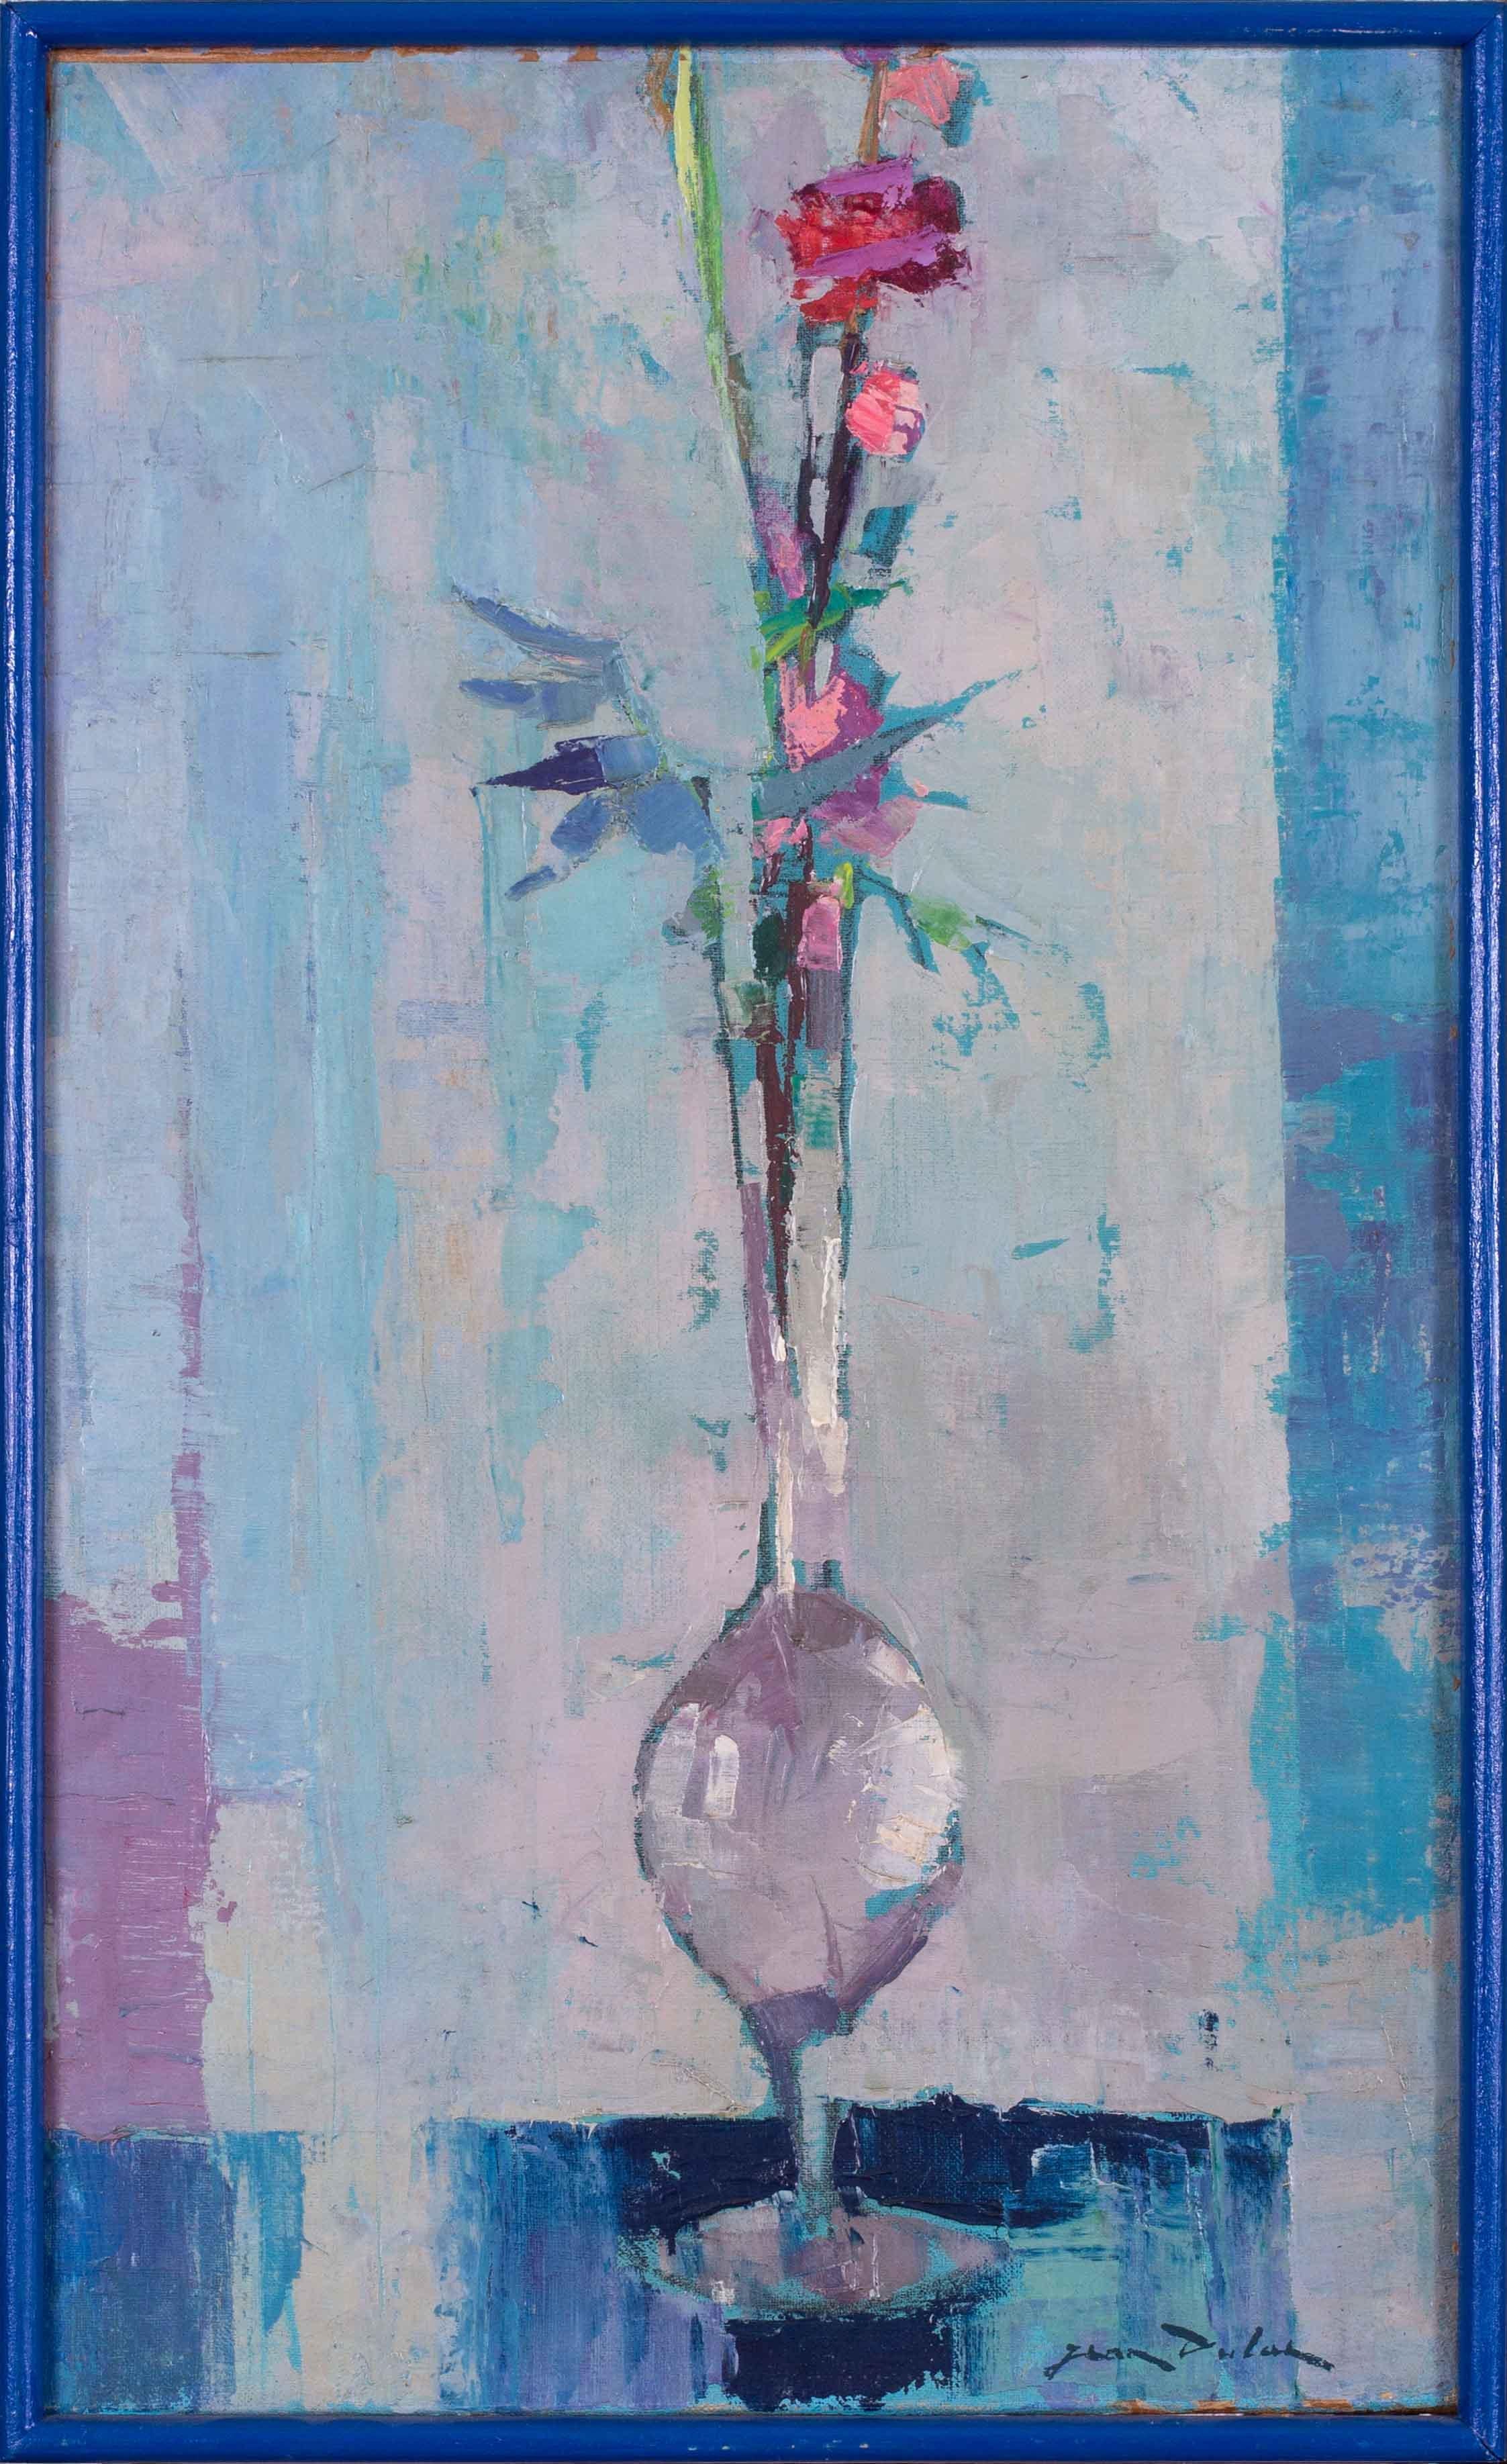 1961 Post Impressionist still life painting of flowers in a stemmed glass, blue